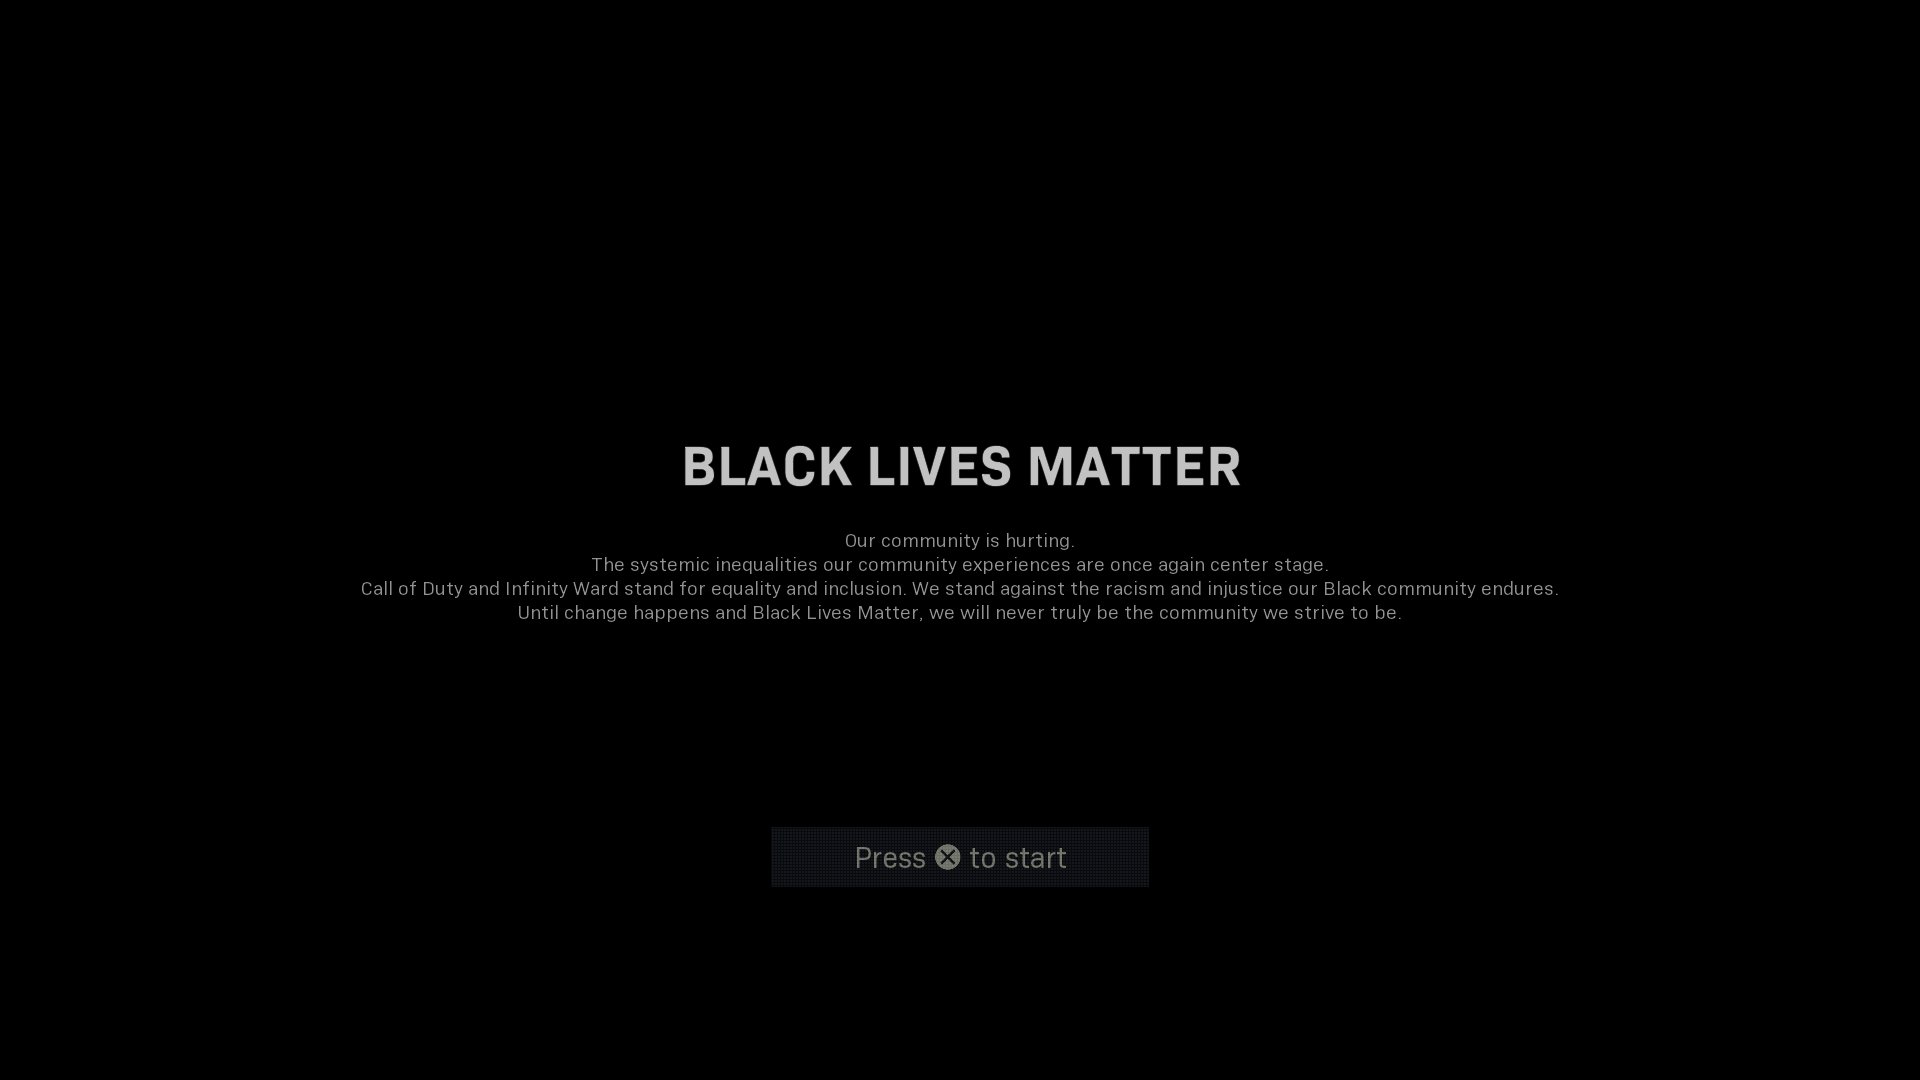 'Call of Duty' Drops #BlackLivesMatter Loading Screens, Black Gamers Hyped